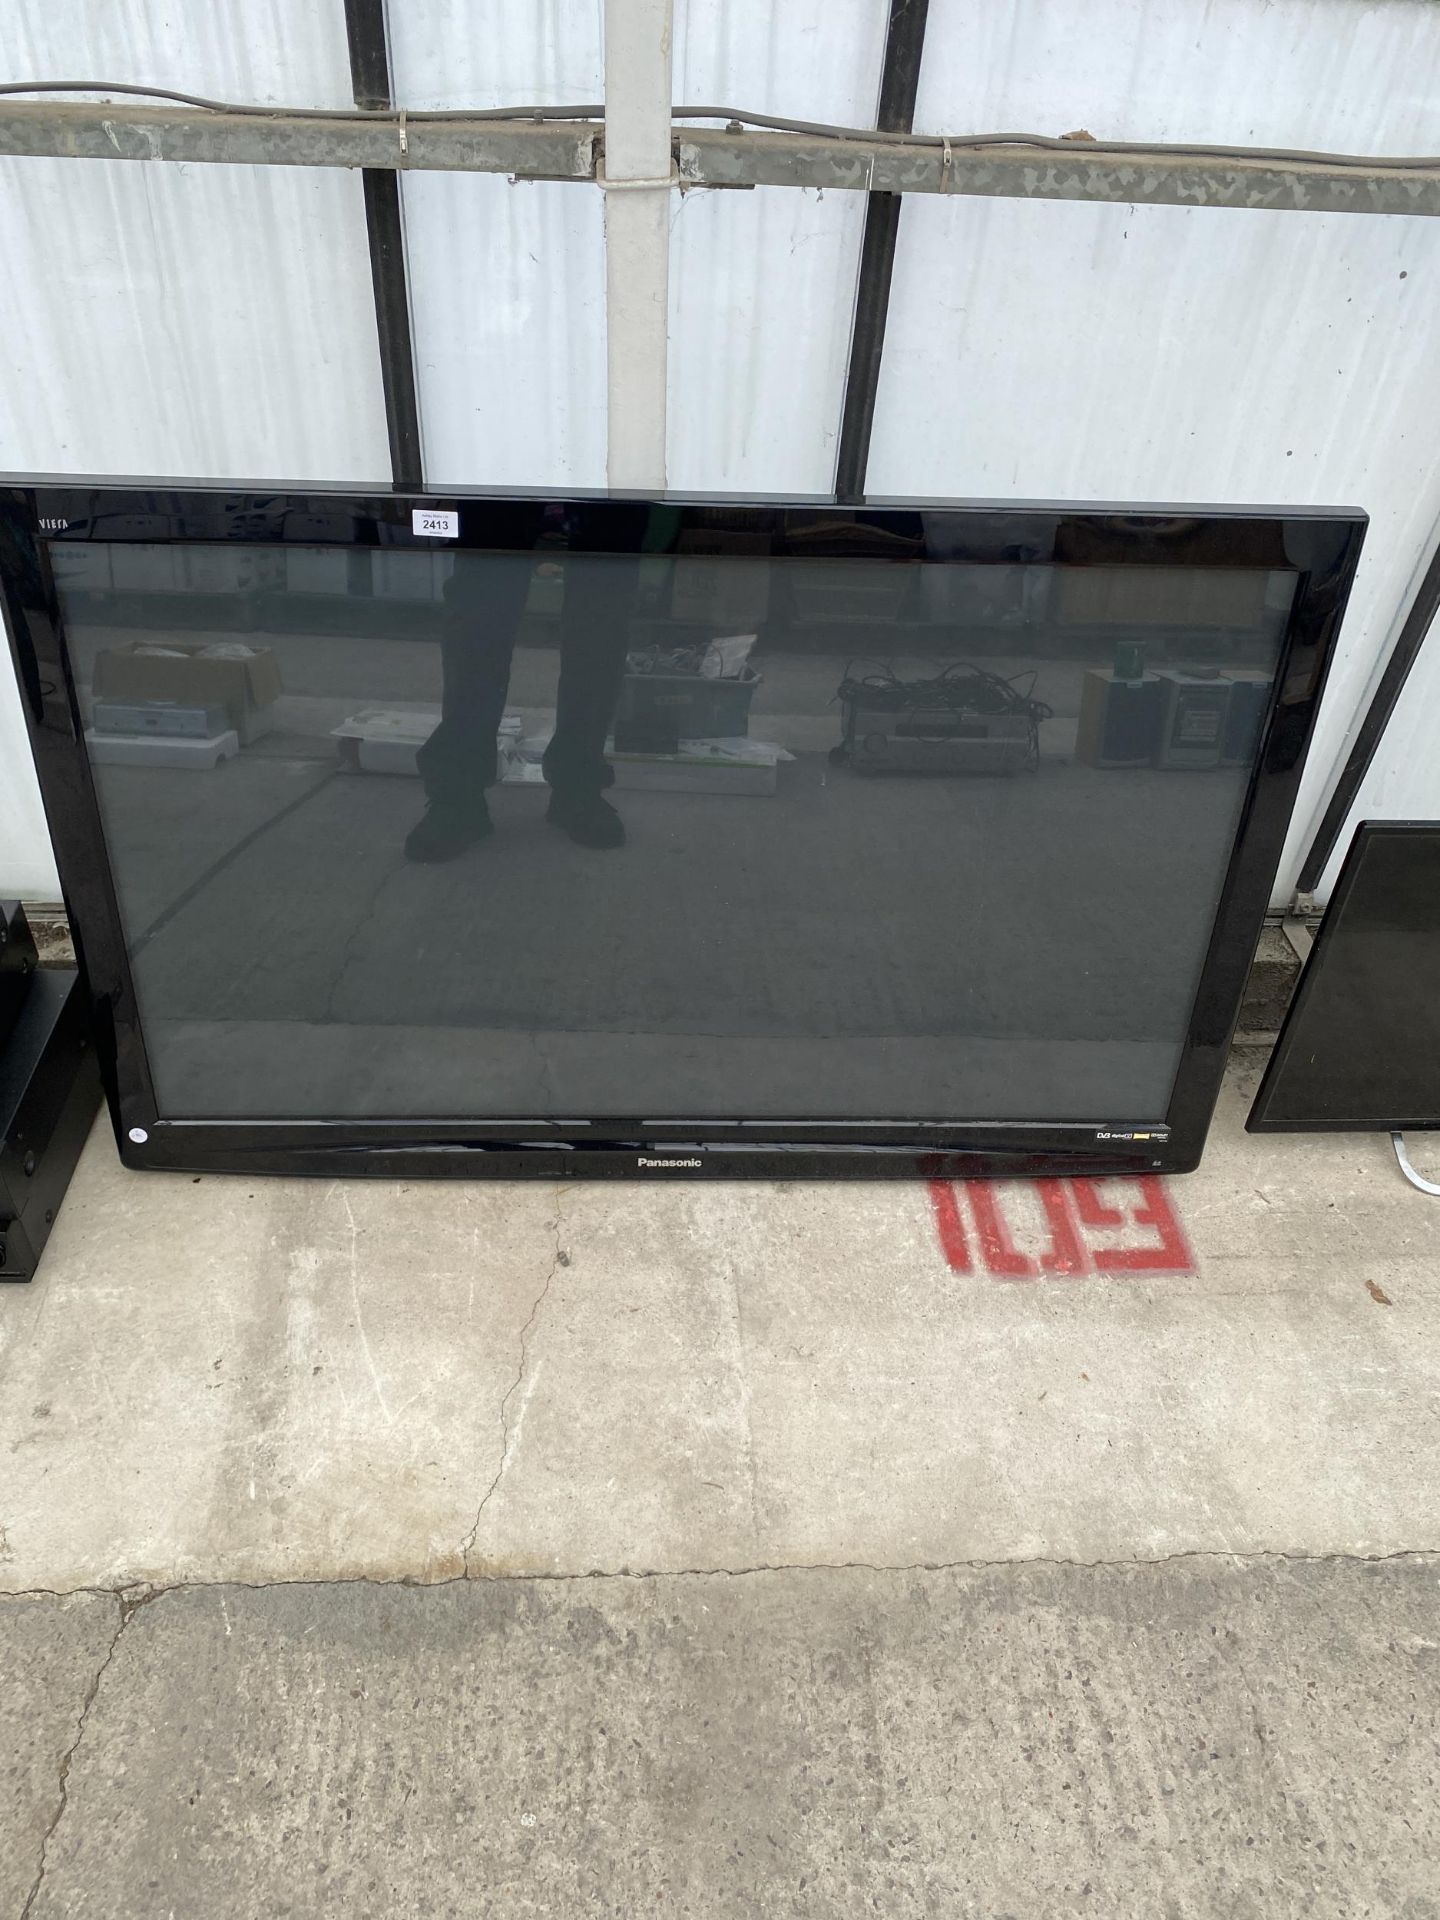 A PANASONIC 50" TELEVISION WITH WALL MOUNTING BRACKET